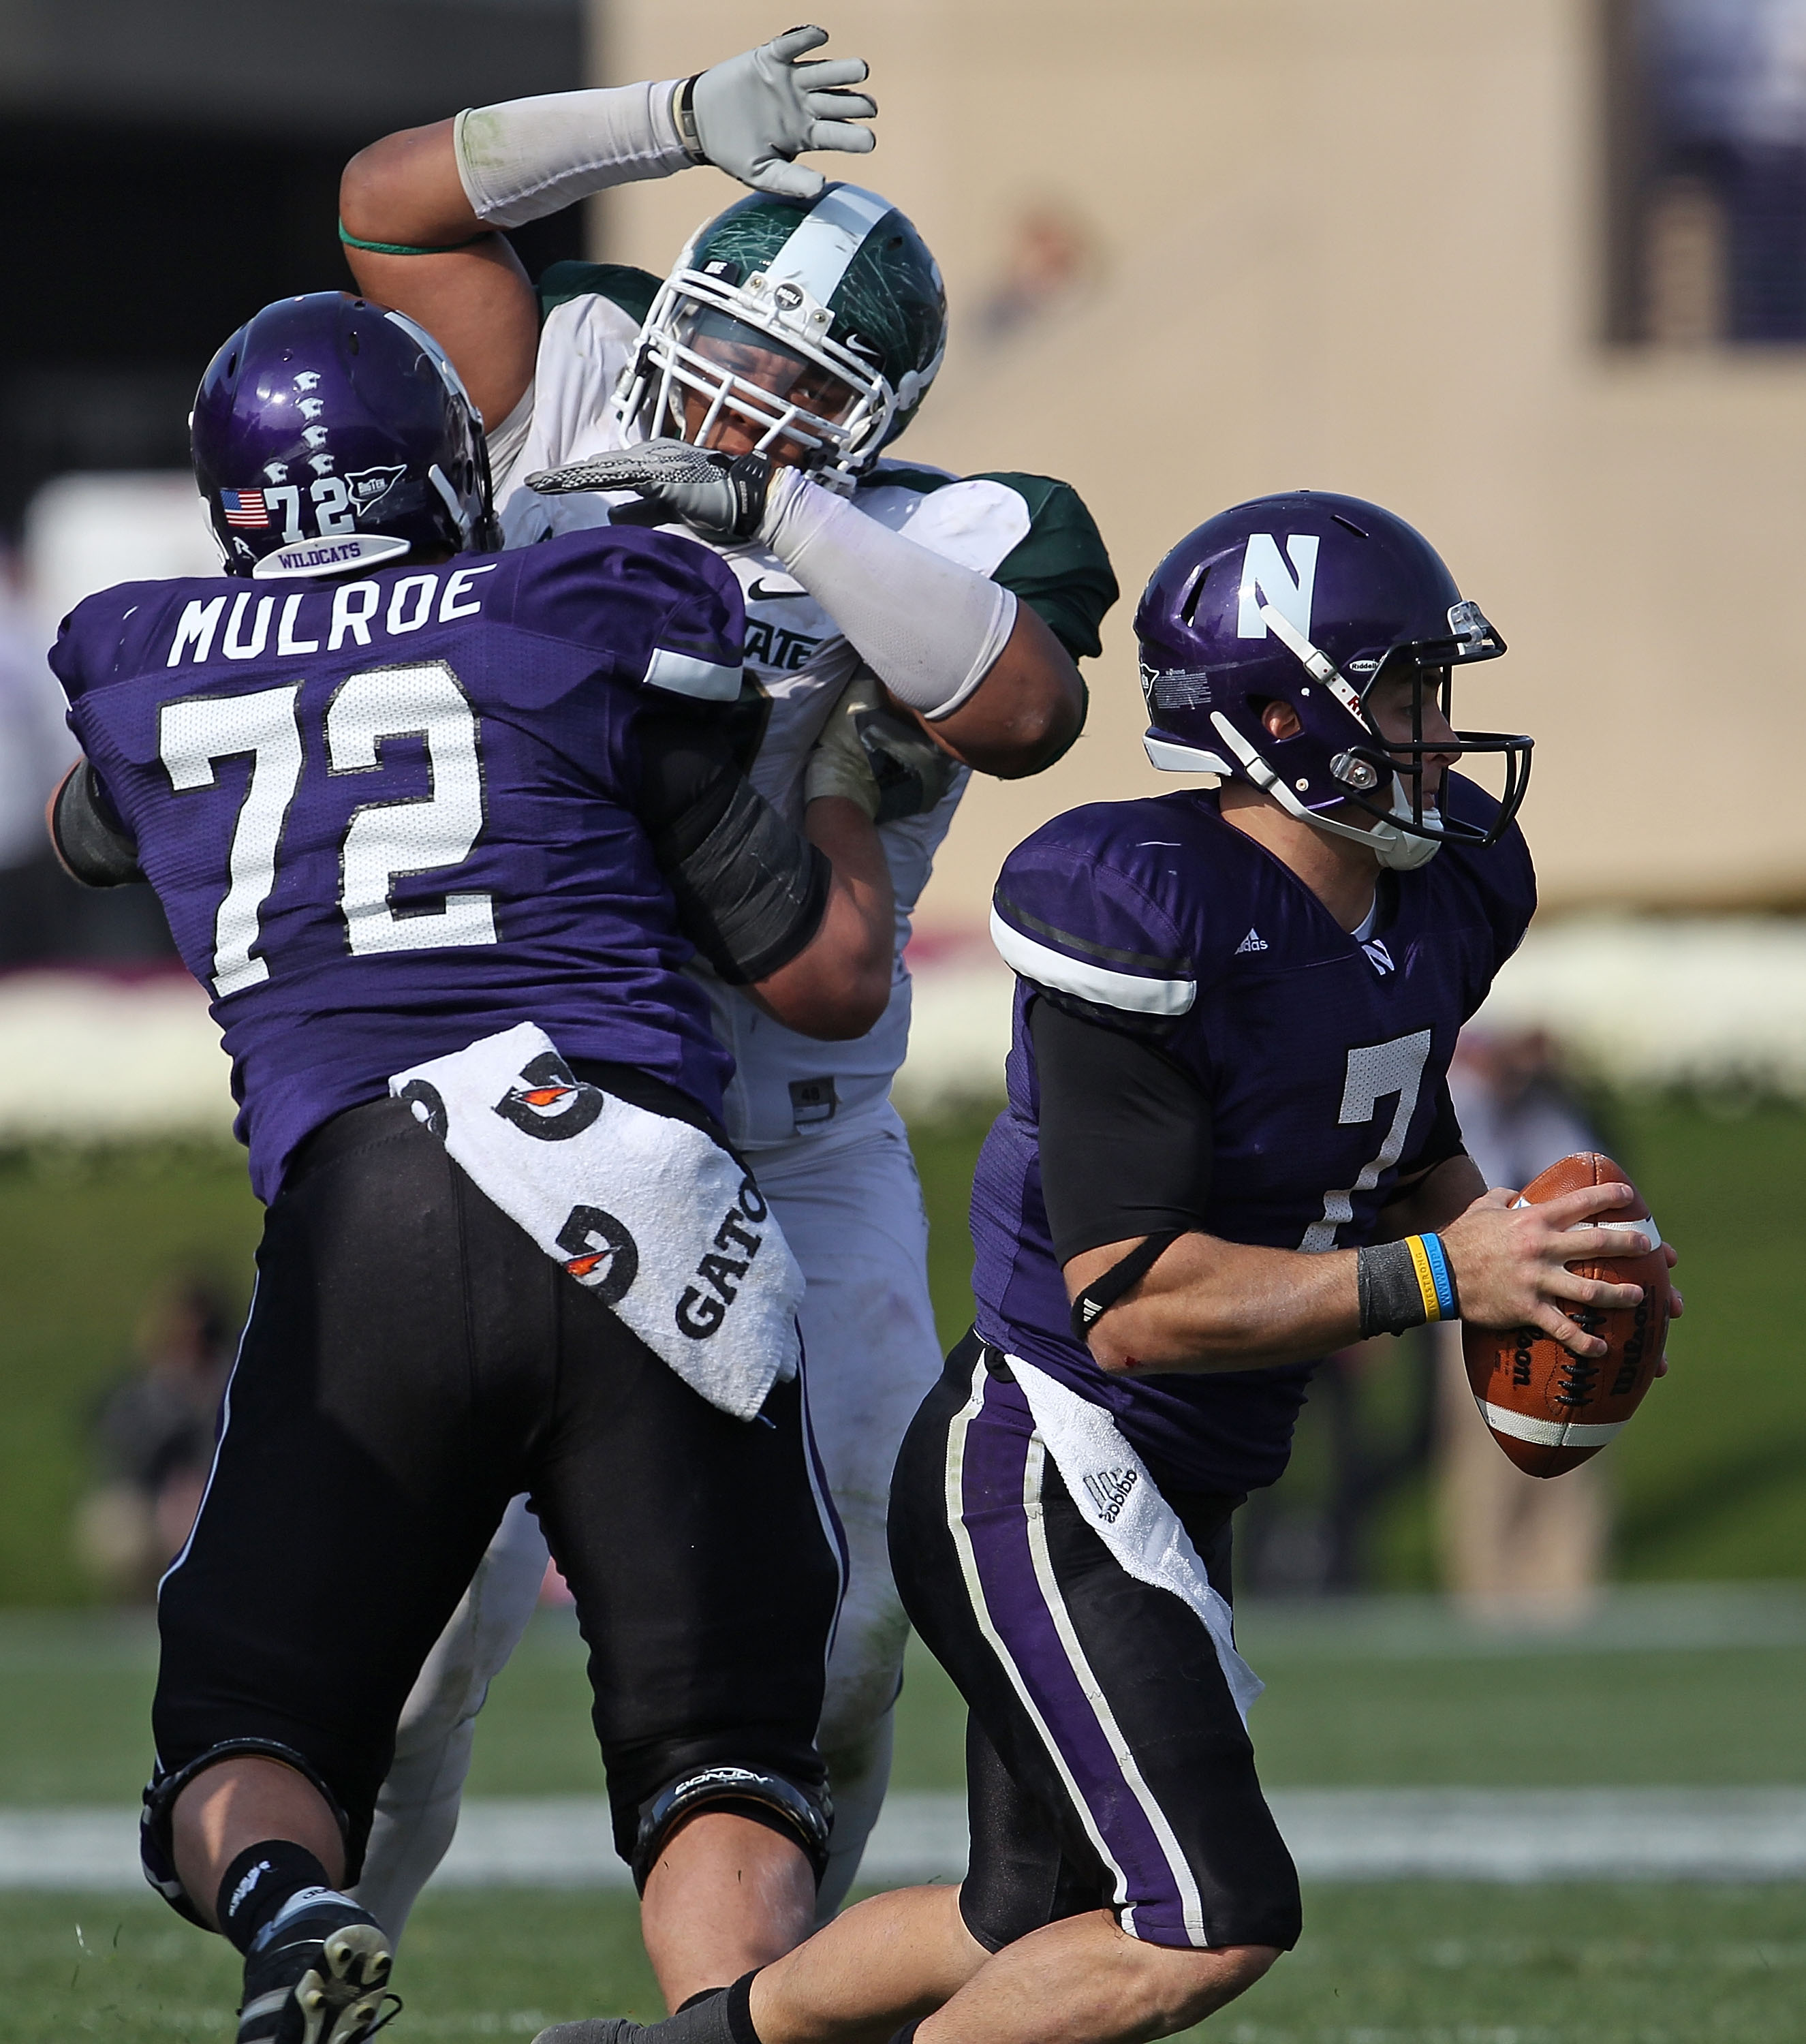 EVANSTON, IL - OCTOBER 23: Dan Persa #7 of the Northwestern Wildcats looks for a receiver as teammate Brain Mulroe #72 blocks Jerel Worthy #99 of the Michigan State Spartans at Ryan Field on October 23, 2010 in Evanston, Illinois. Michigan State defeated